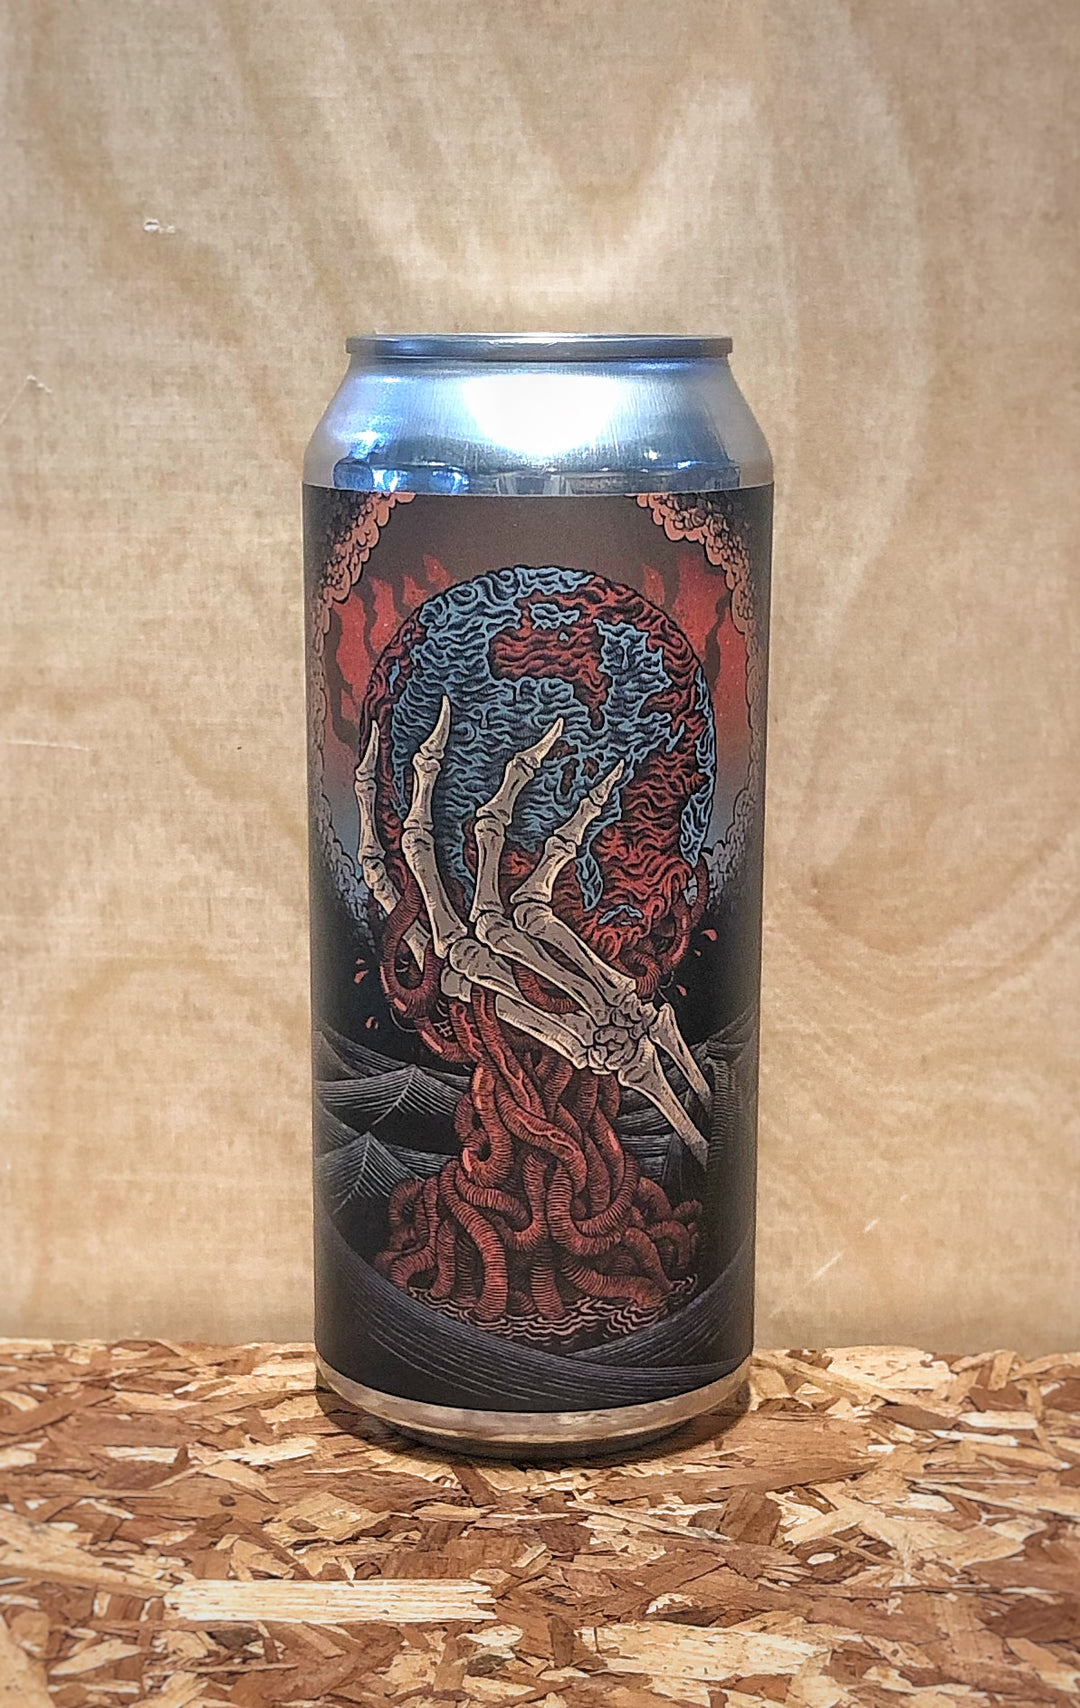 Abomination Brewing Co. 'Rotting Earth' Double Dry Hopped Double IPA (North Haven, CT)